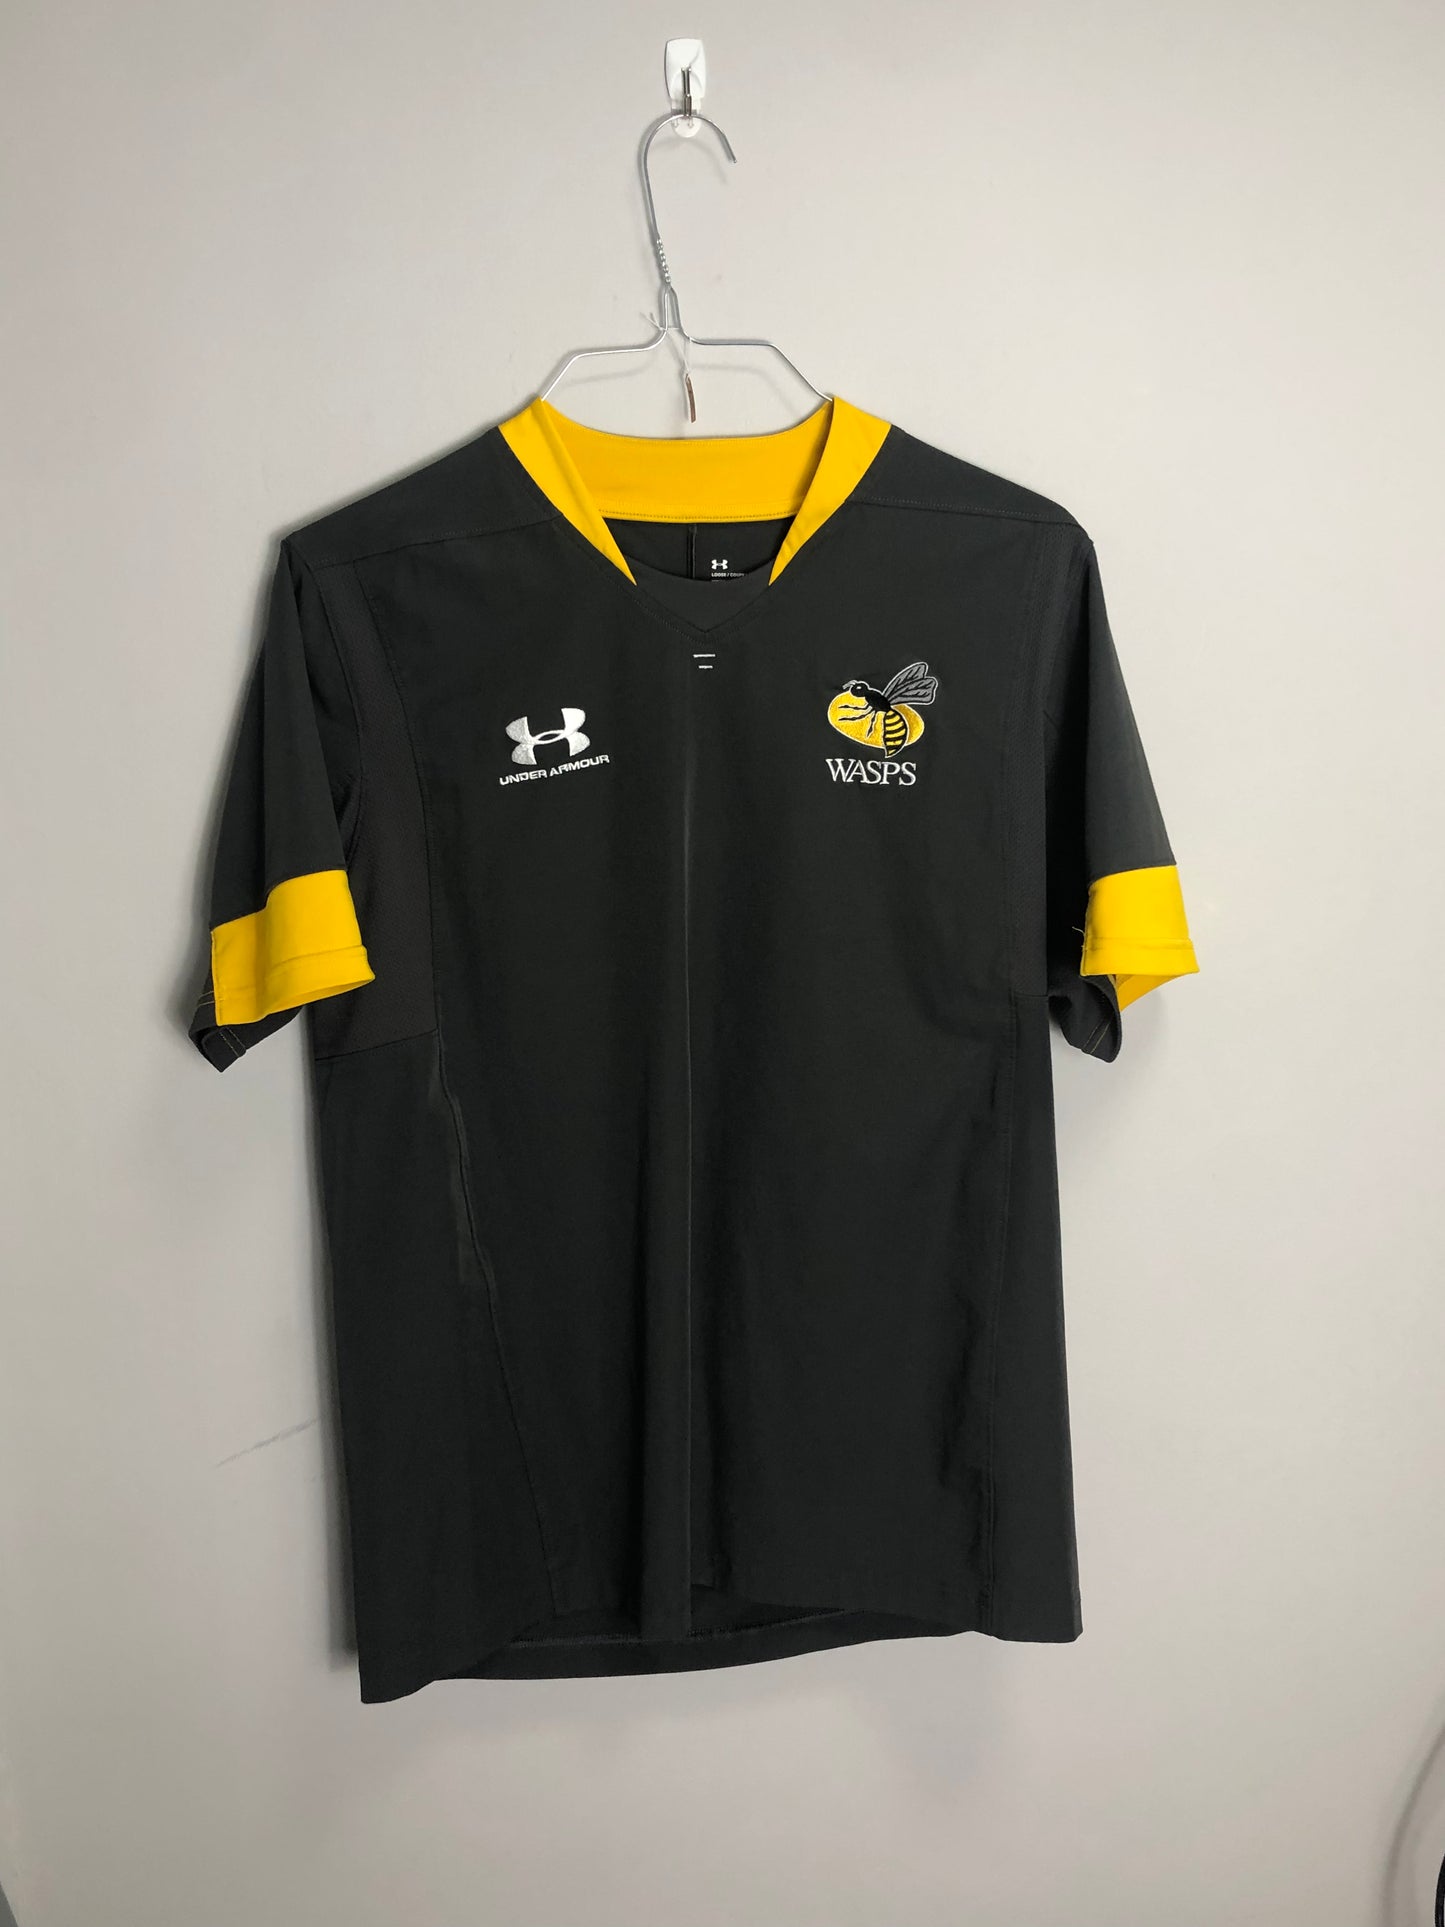 Wasps Rugby Player Issue Tee Shirt - Large - 40” Chest - #33